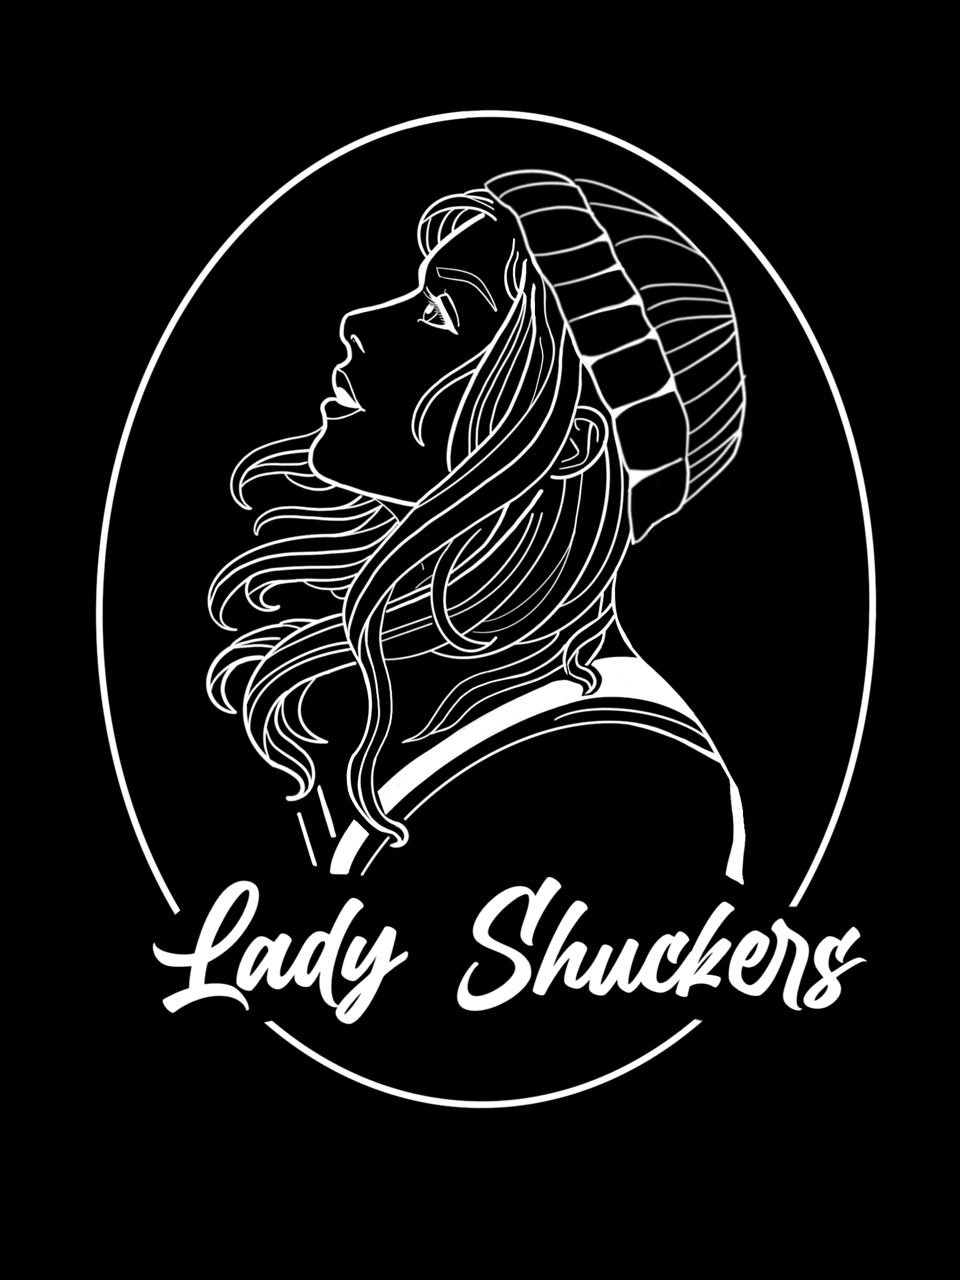 Lady Shuckers